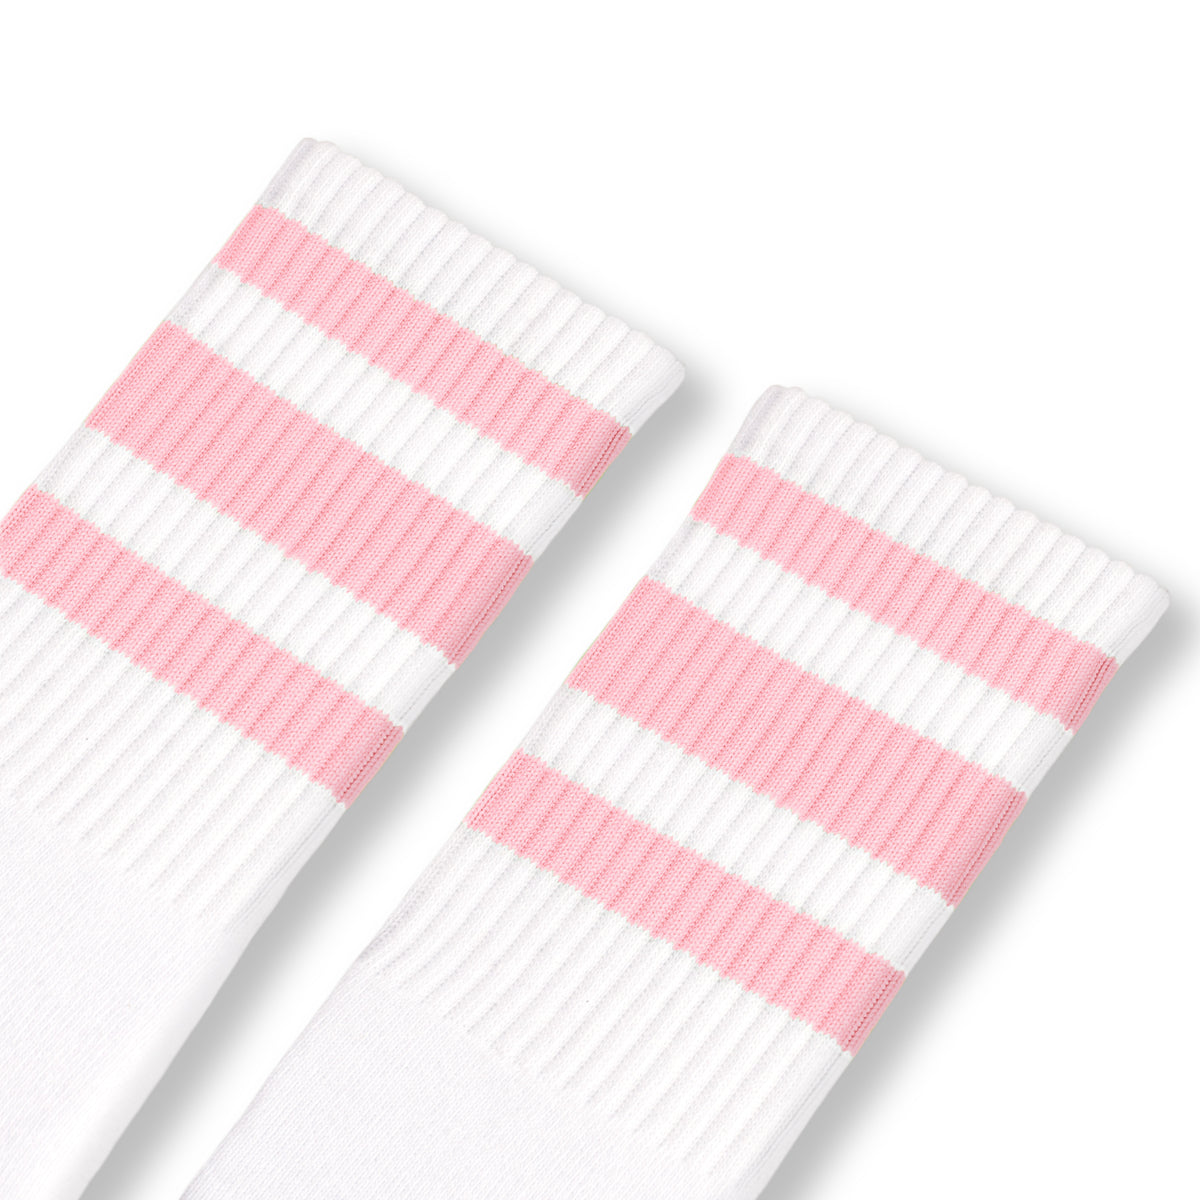 light pink and white stripes